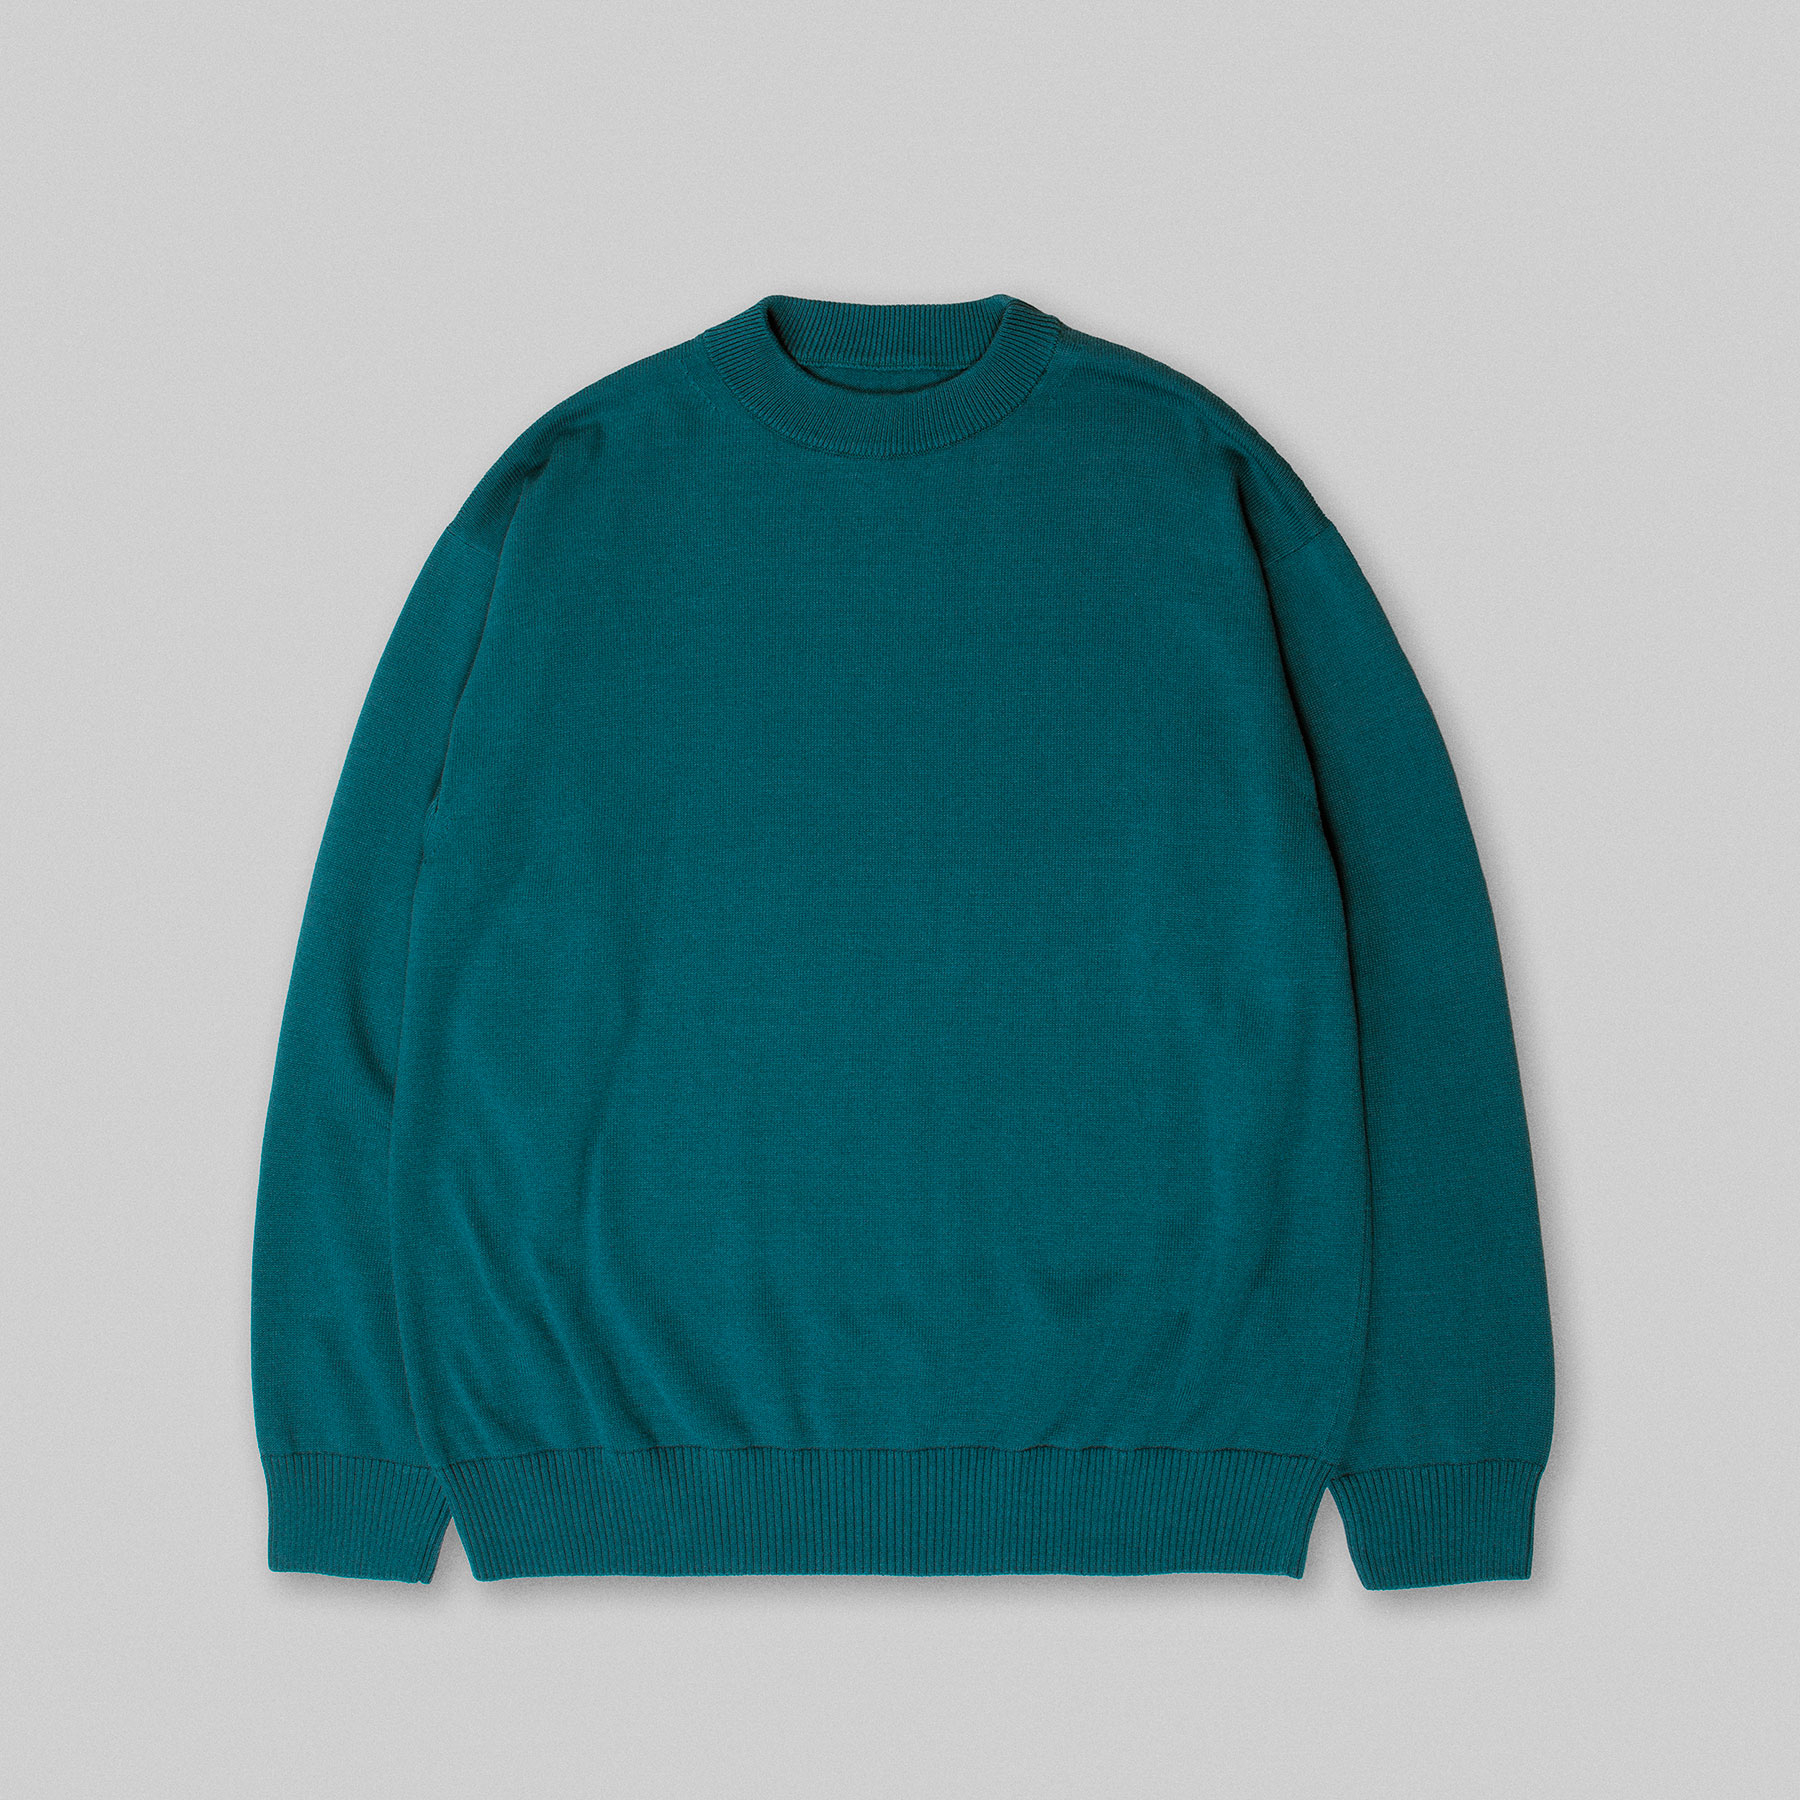 STANDARD sweater by Arpenteur in Storm blue color